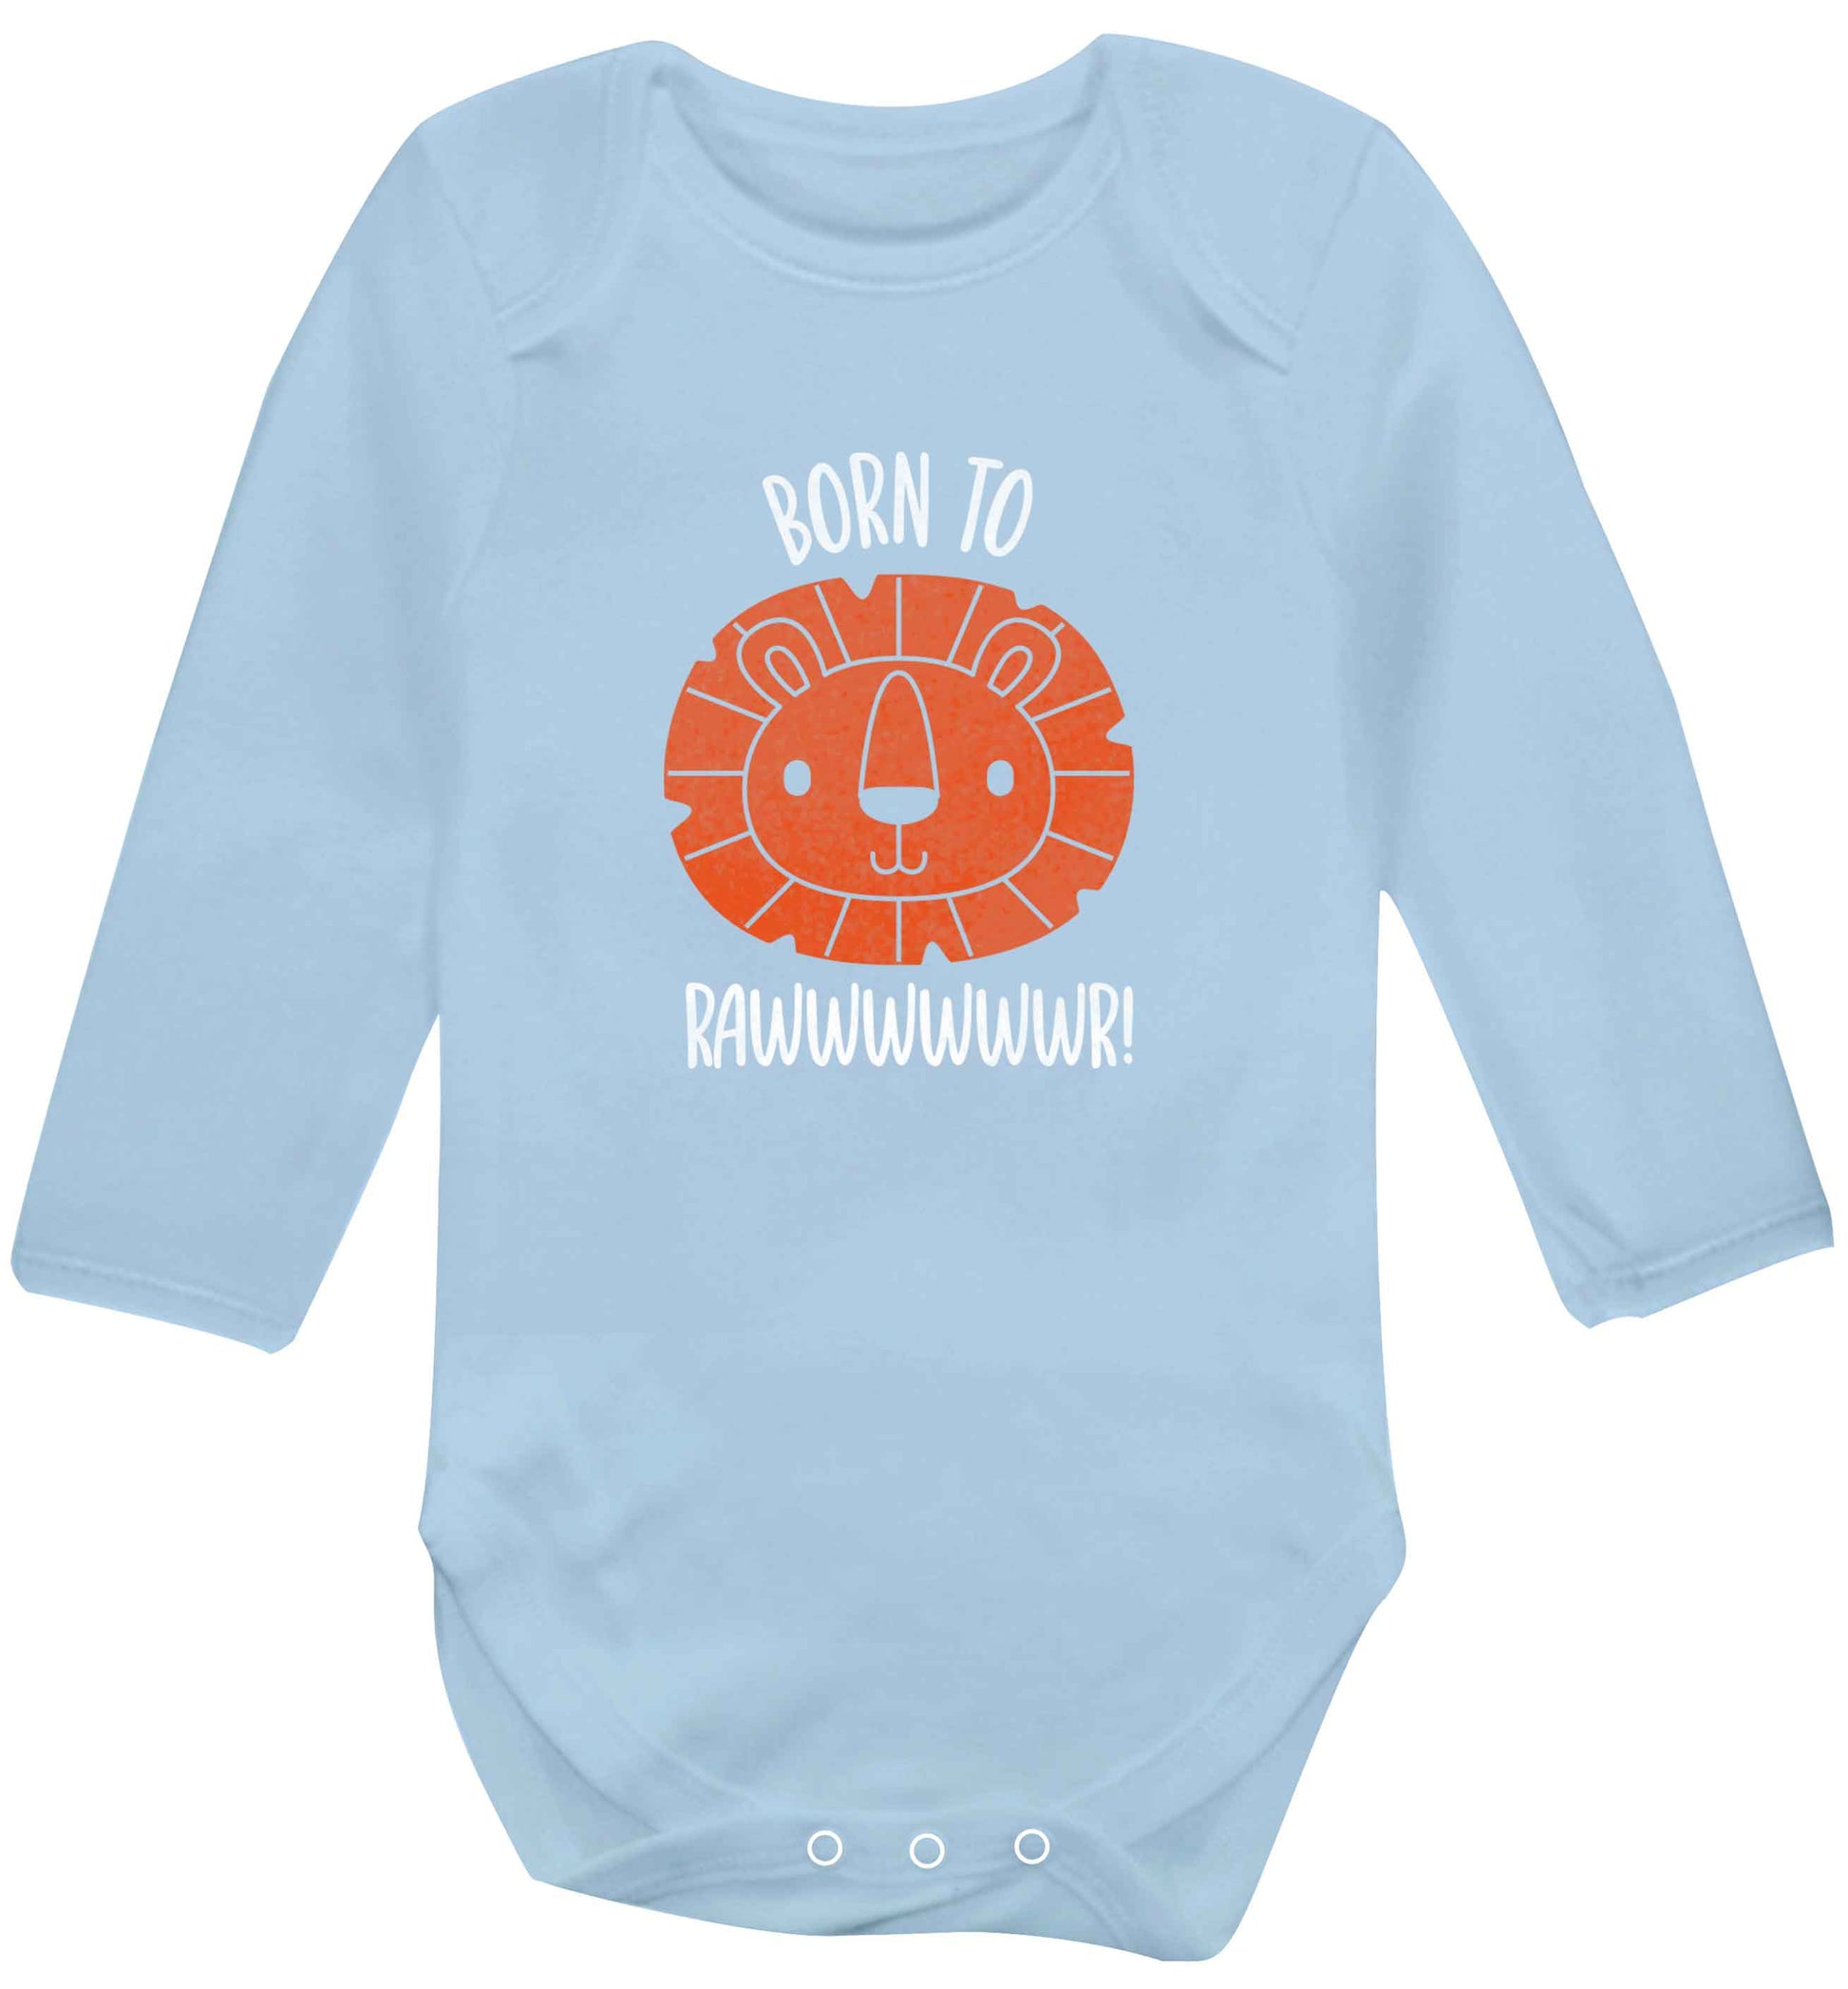 Born to rawr baby vest long sleeved pale blue 6-12 months